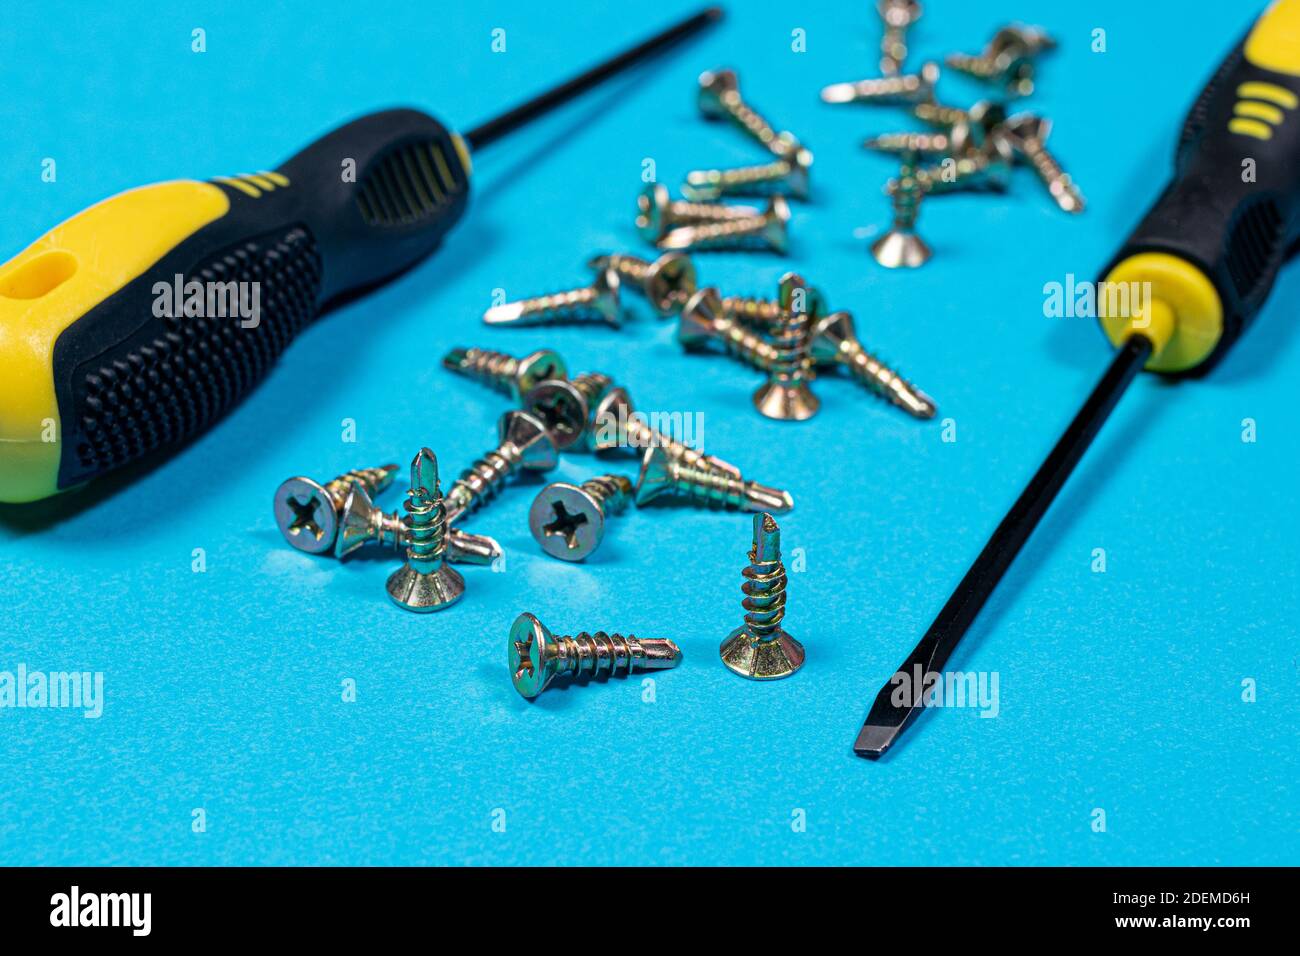 Screwdrivers and self-cutters on a blue background. Banner for a construction store, tools for repairing furniture Stock Photo